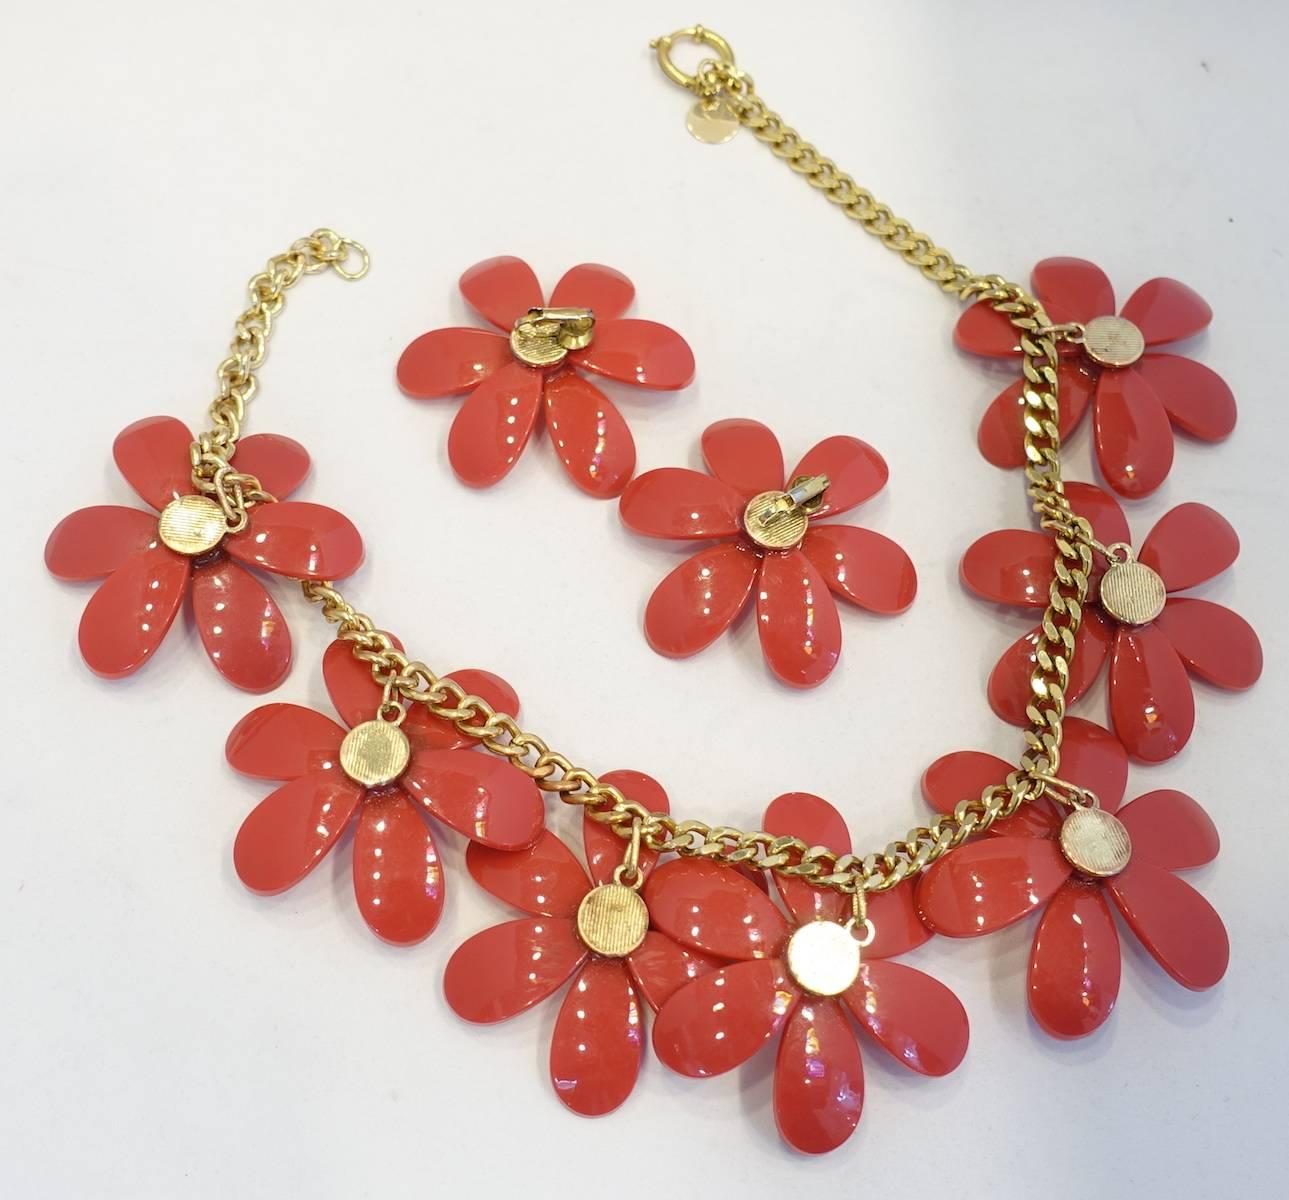 This is a one-of-a-kind original Anka design and features stunning raspberry color resin flowers with a faceted crystal in the center of each flower. The necklace measures 20” x 2-1/2” with a spring closure in a gold tone setting. The matching clip